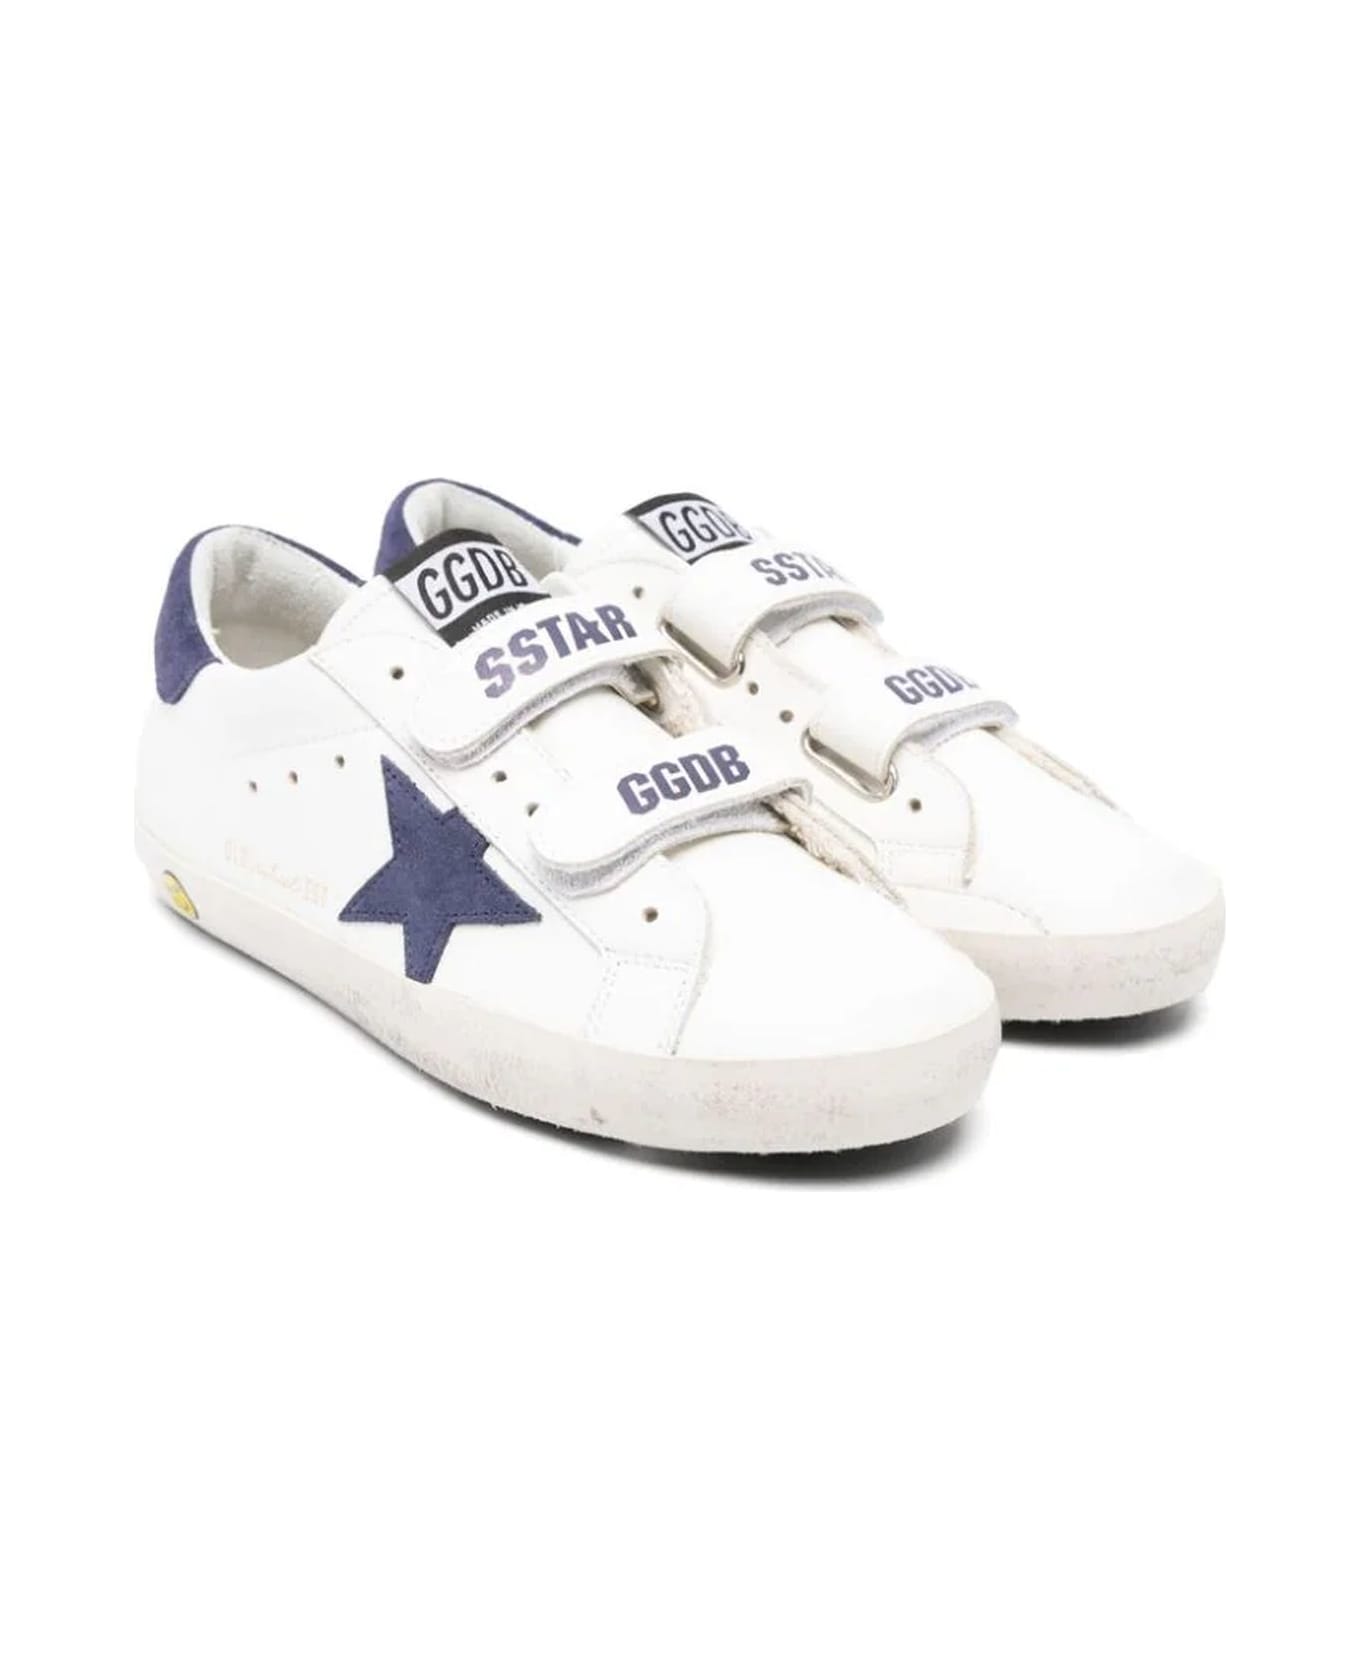 Golden Goose White Leather Sneakers - WHITE/BLUE DEPTHS